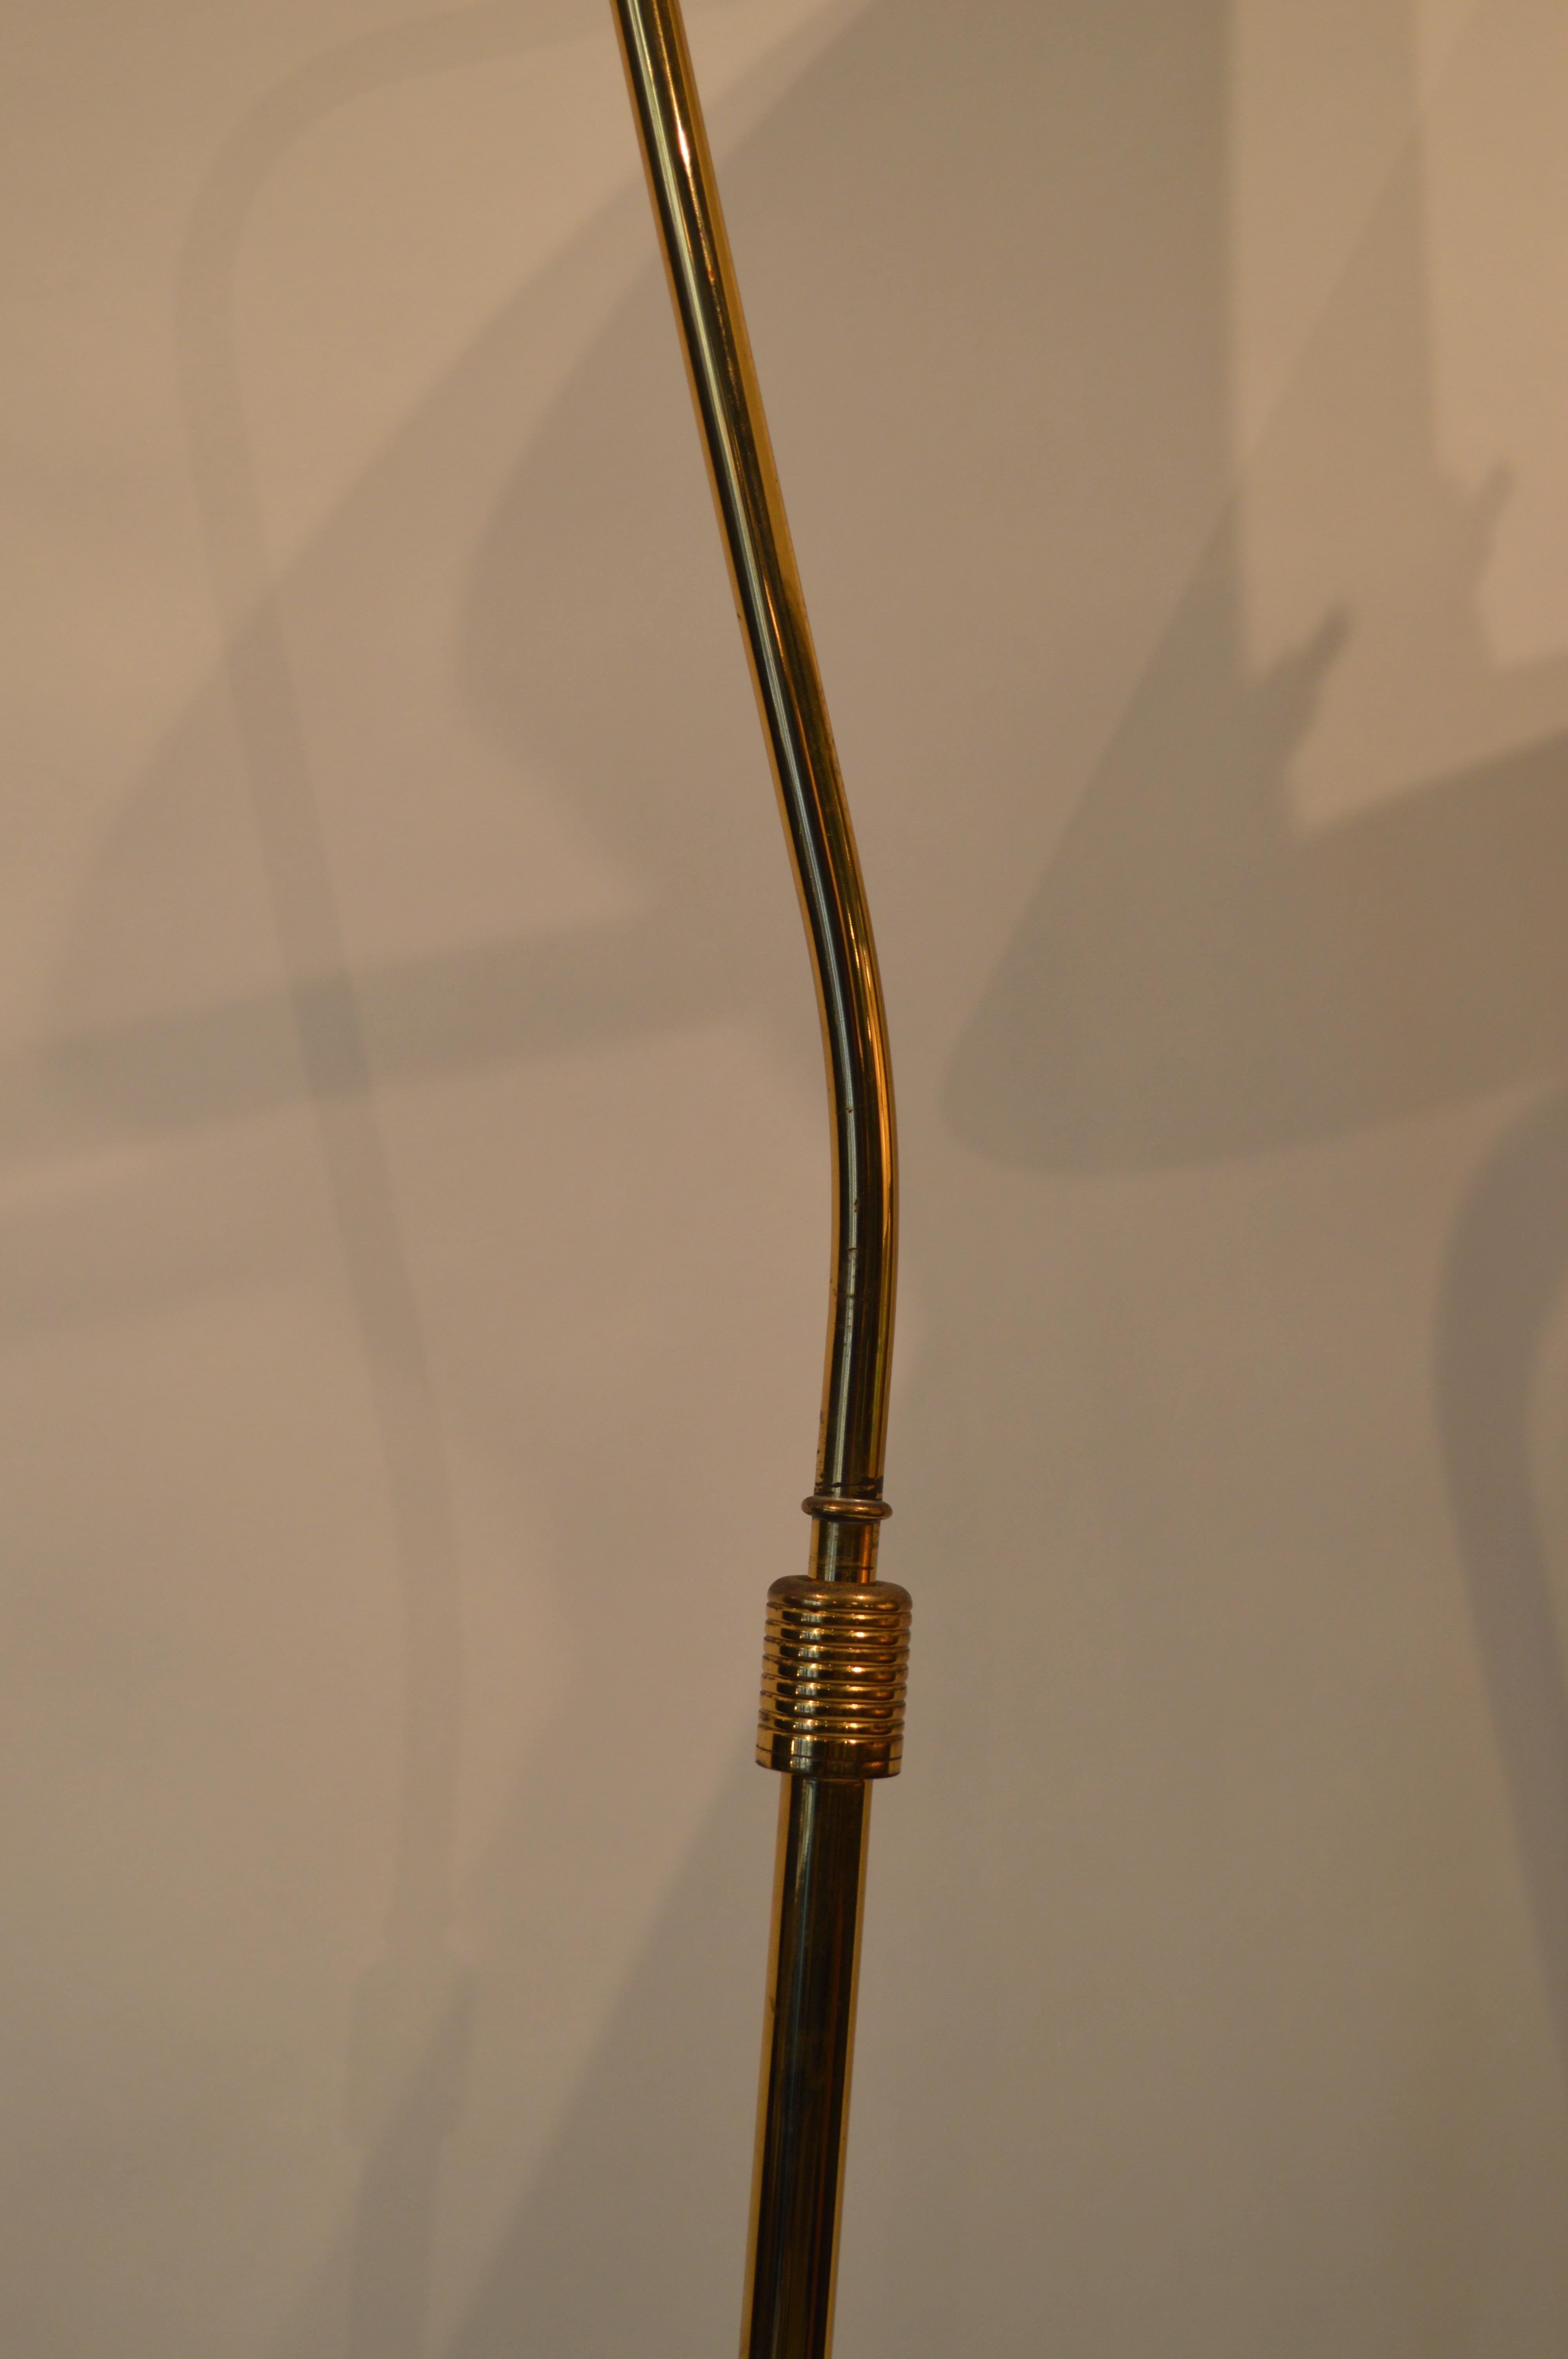 Floor lamp in brass by Arlus.
French work circa 1960.
Adjustable height.
Lamp shade redone as original.